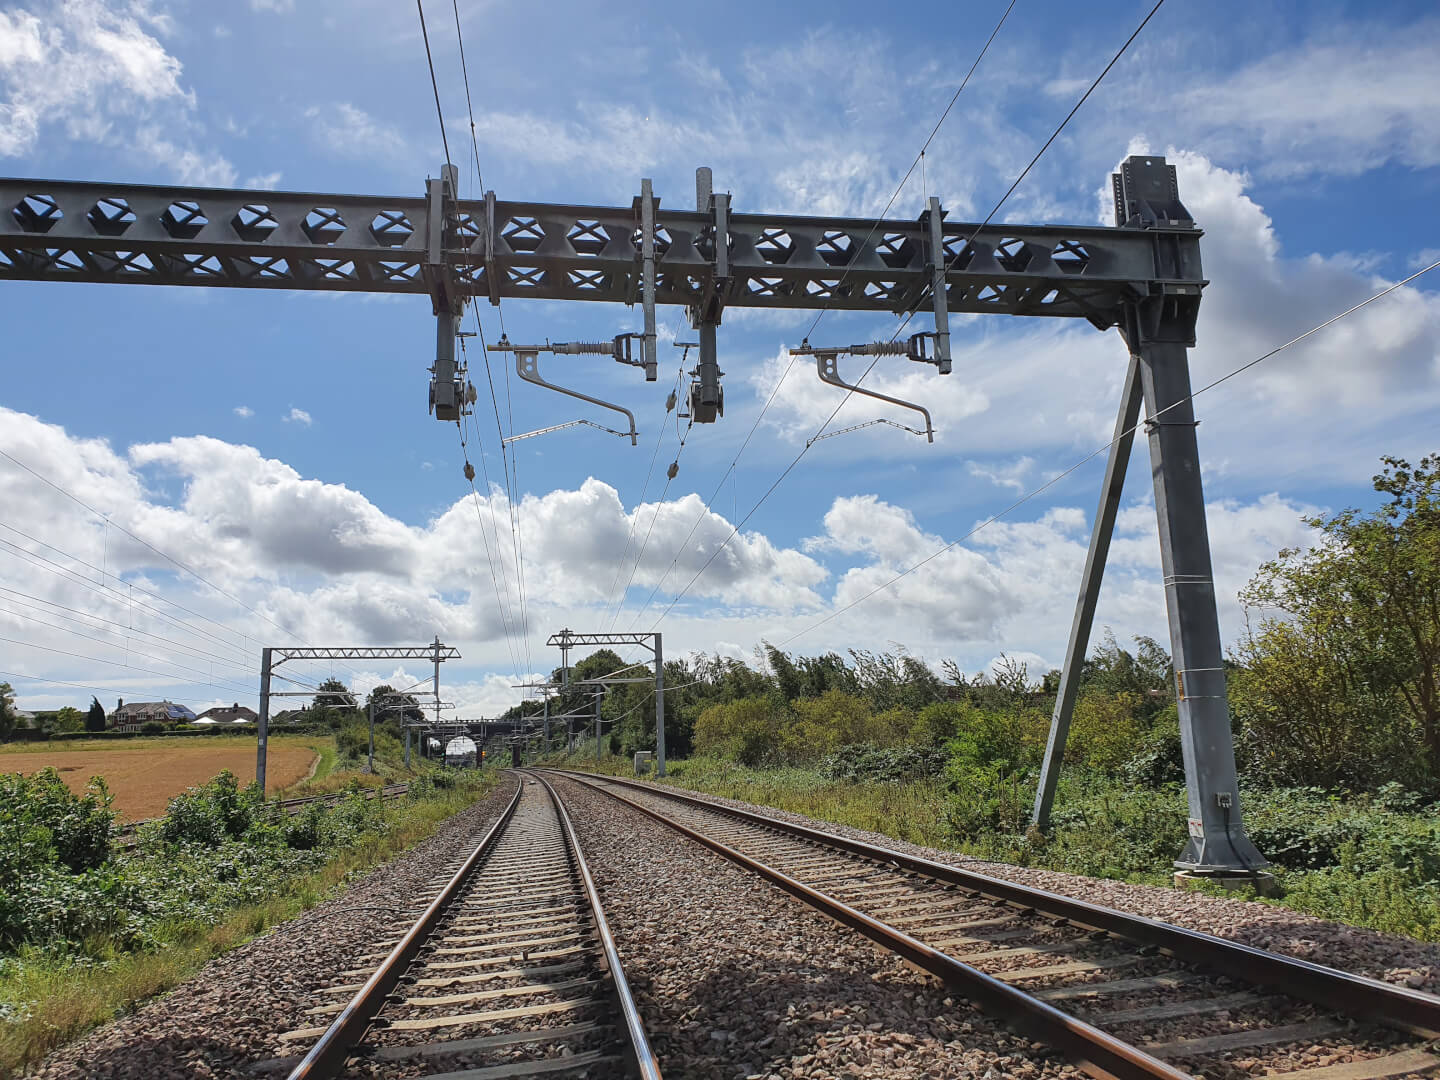 Overhead electrification lines on a railway track